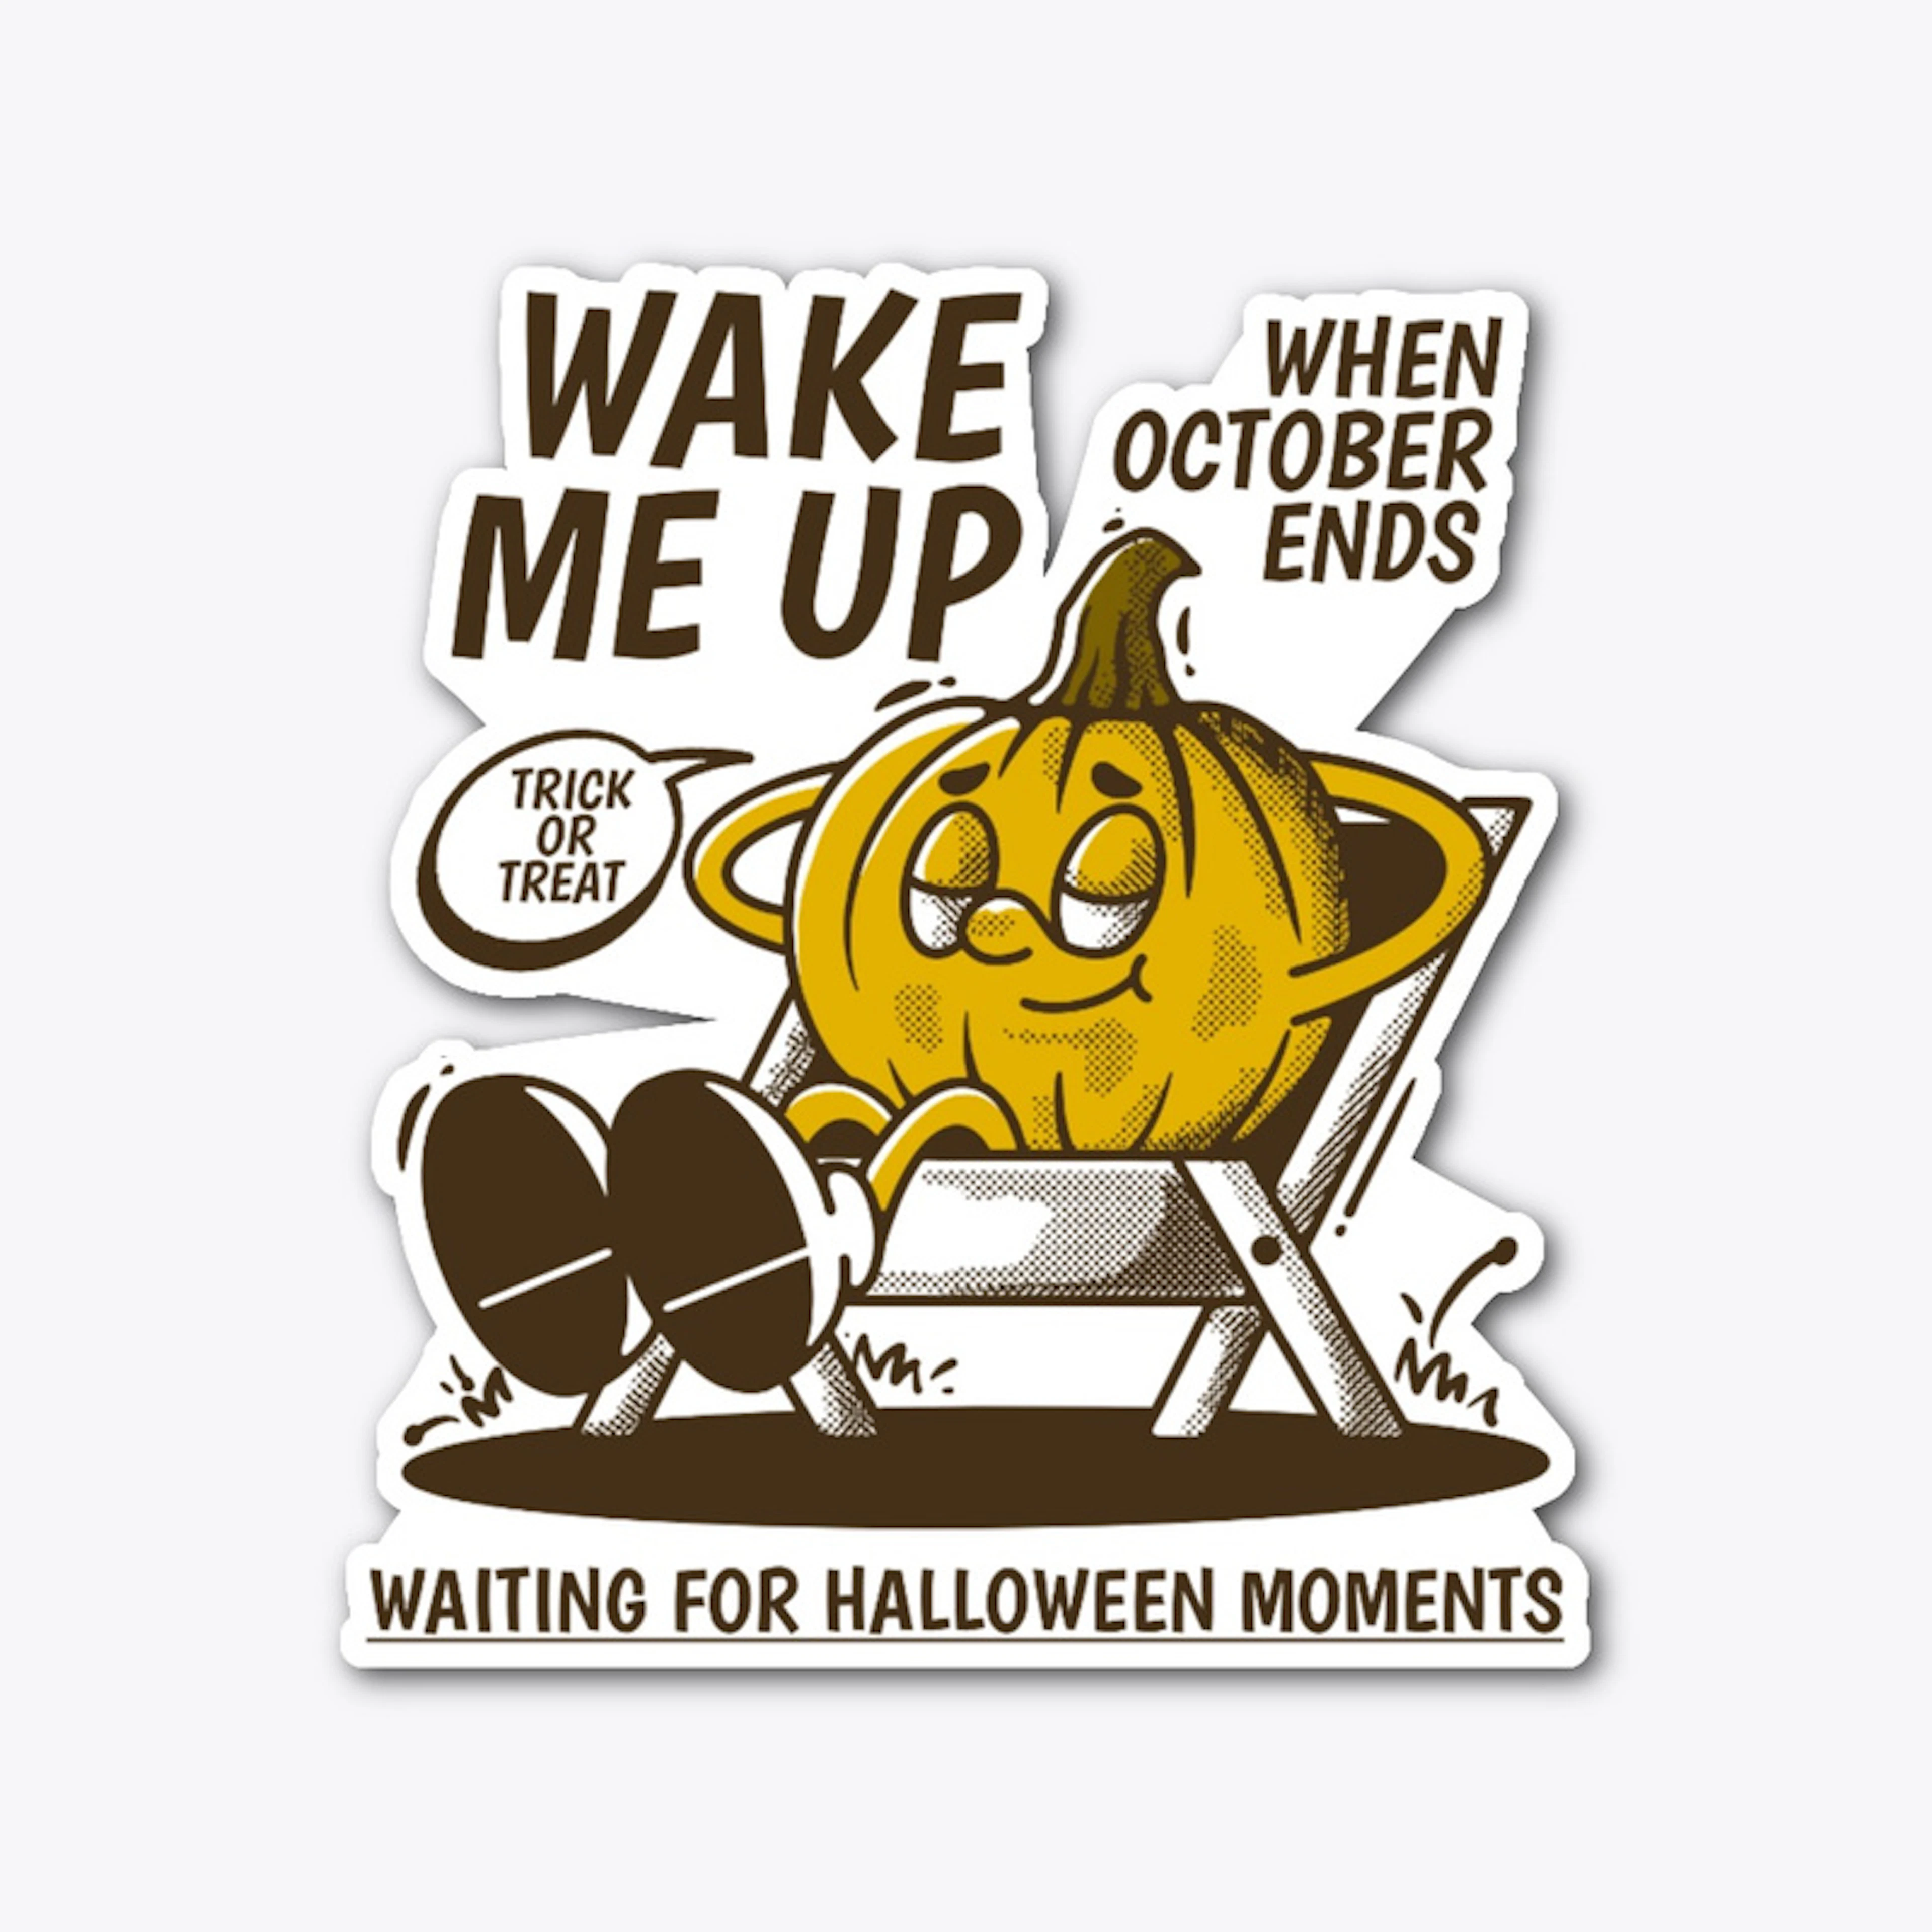 Wake me up when october ends